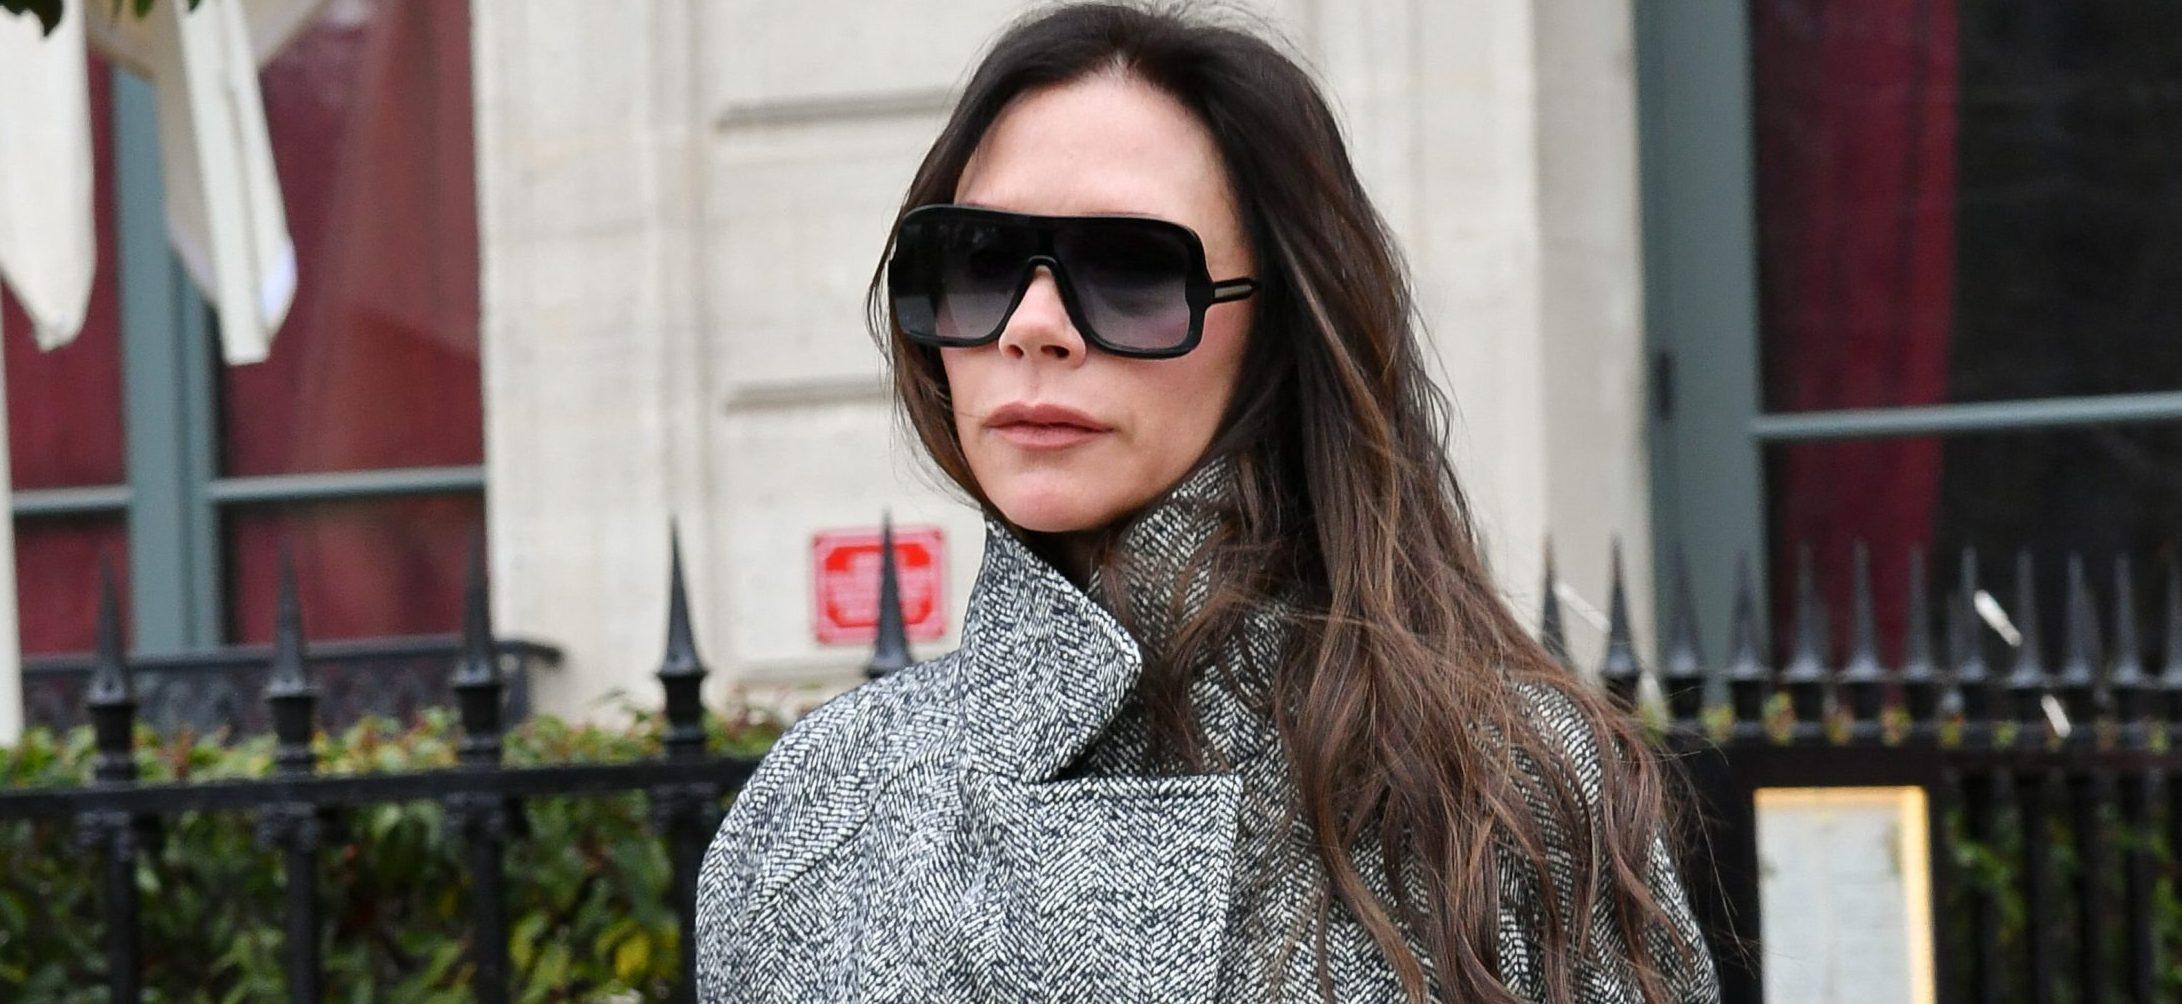 Victoria Beckham’s ‘Casual’ Pool-Lounging Look Compared To ‘Kitchen Apron’ By Unimpressed Fans